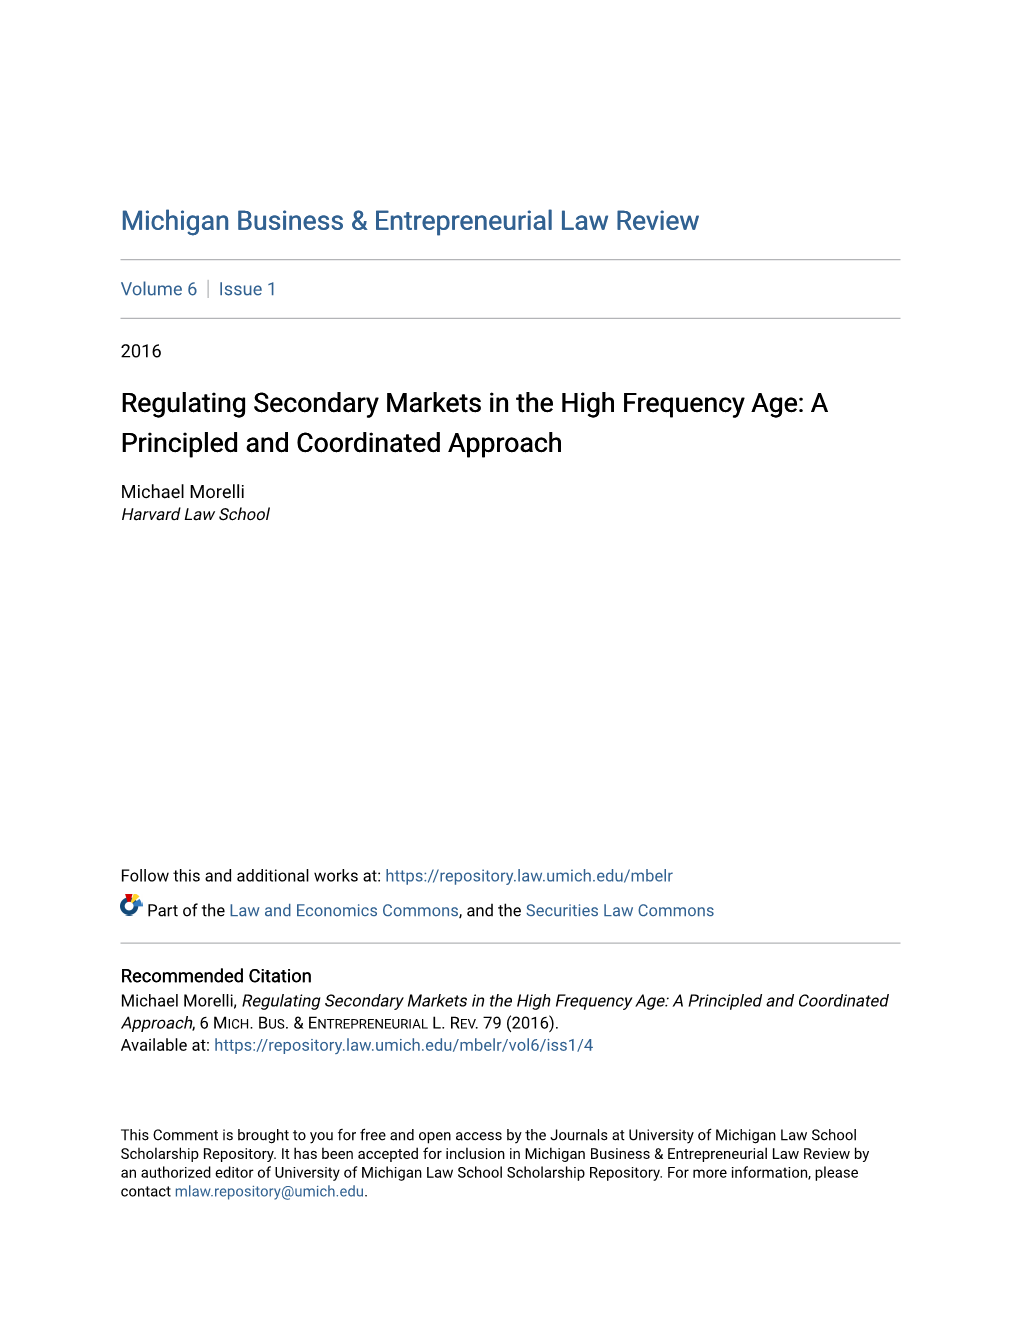 Regulating Secondary Markets in the High Frequency Age: a Principled and Coordinated Approach